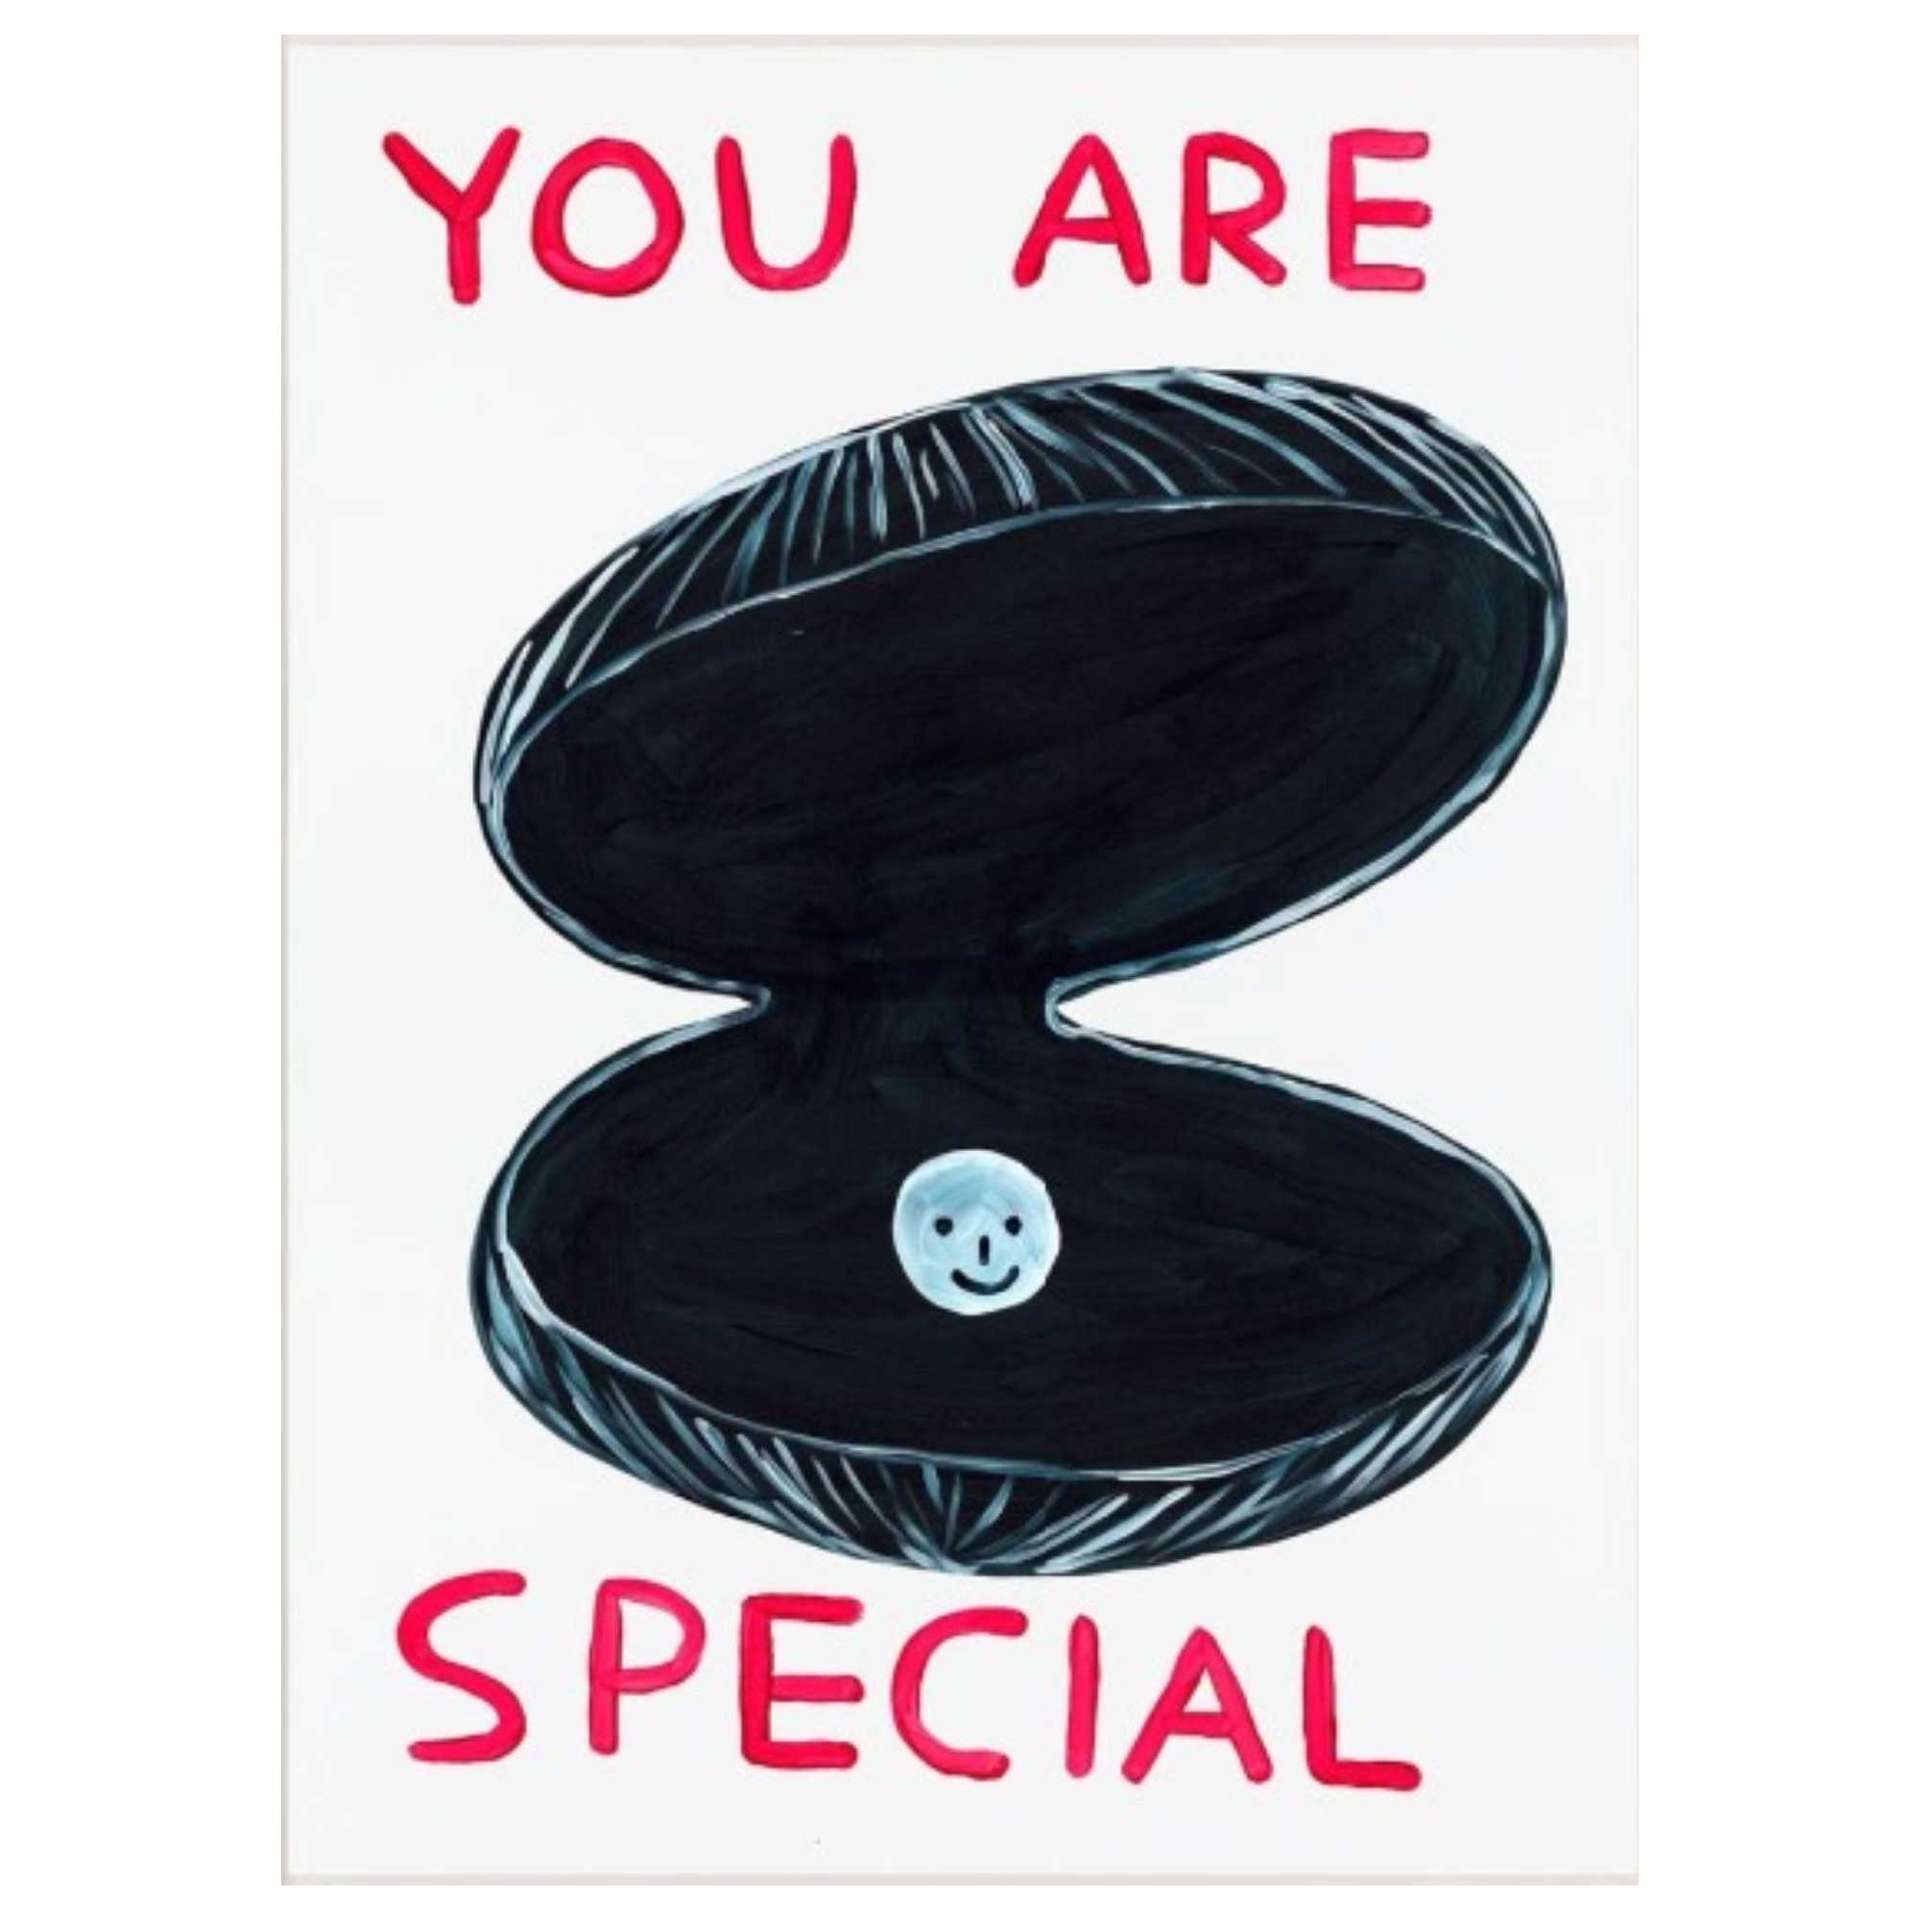 You Are Special by David Shrigley